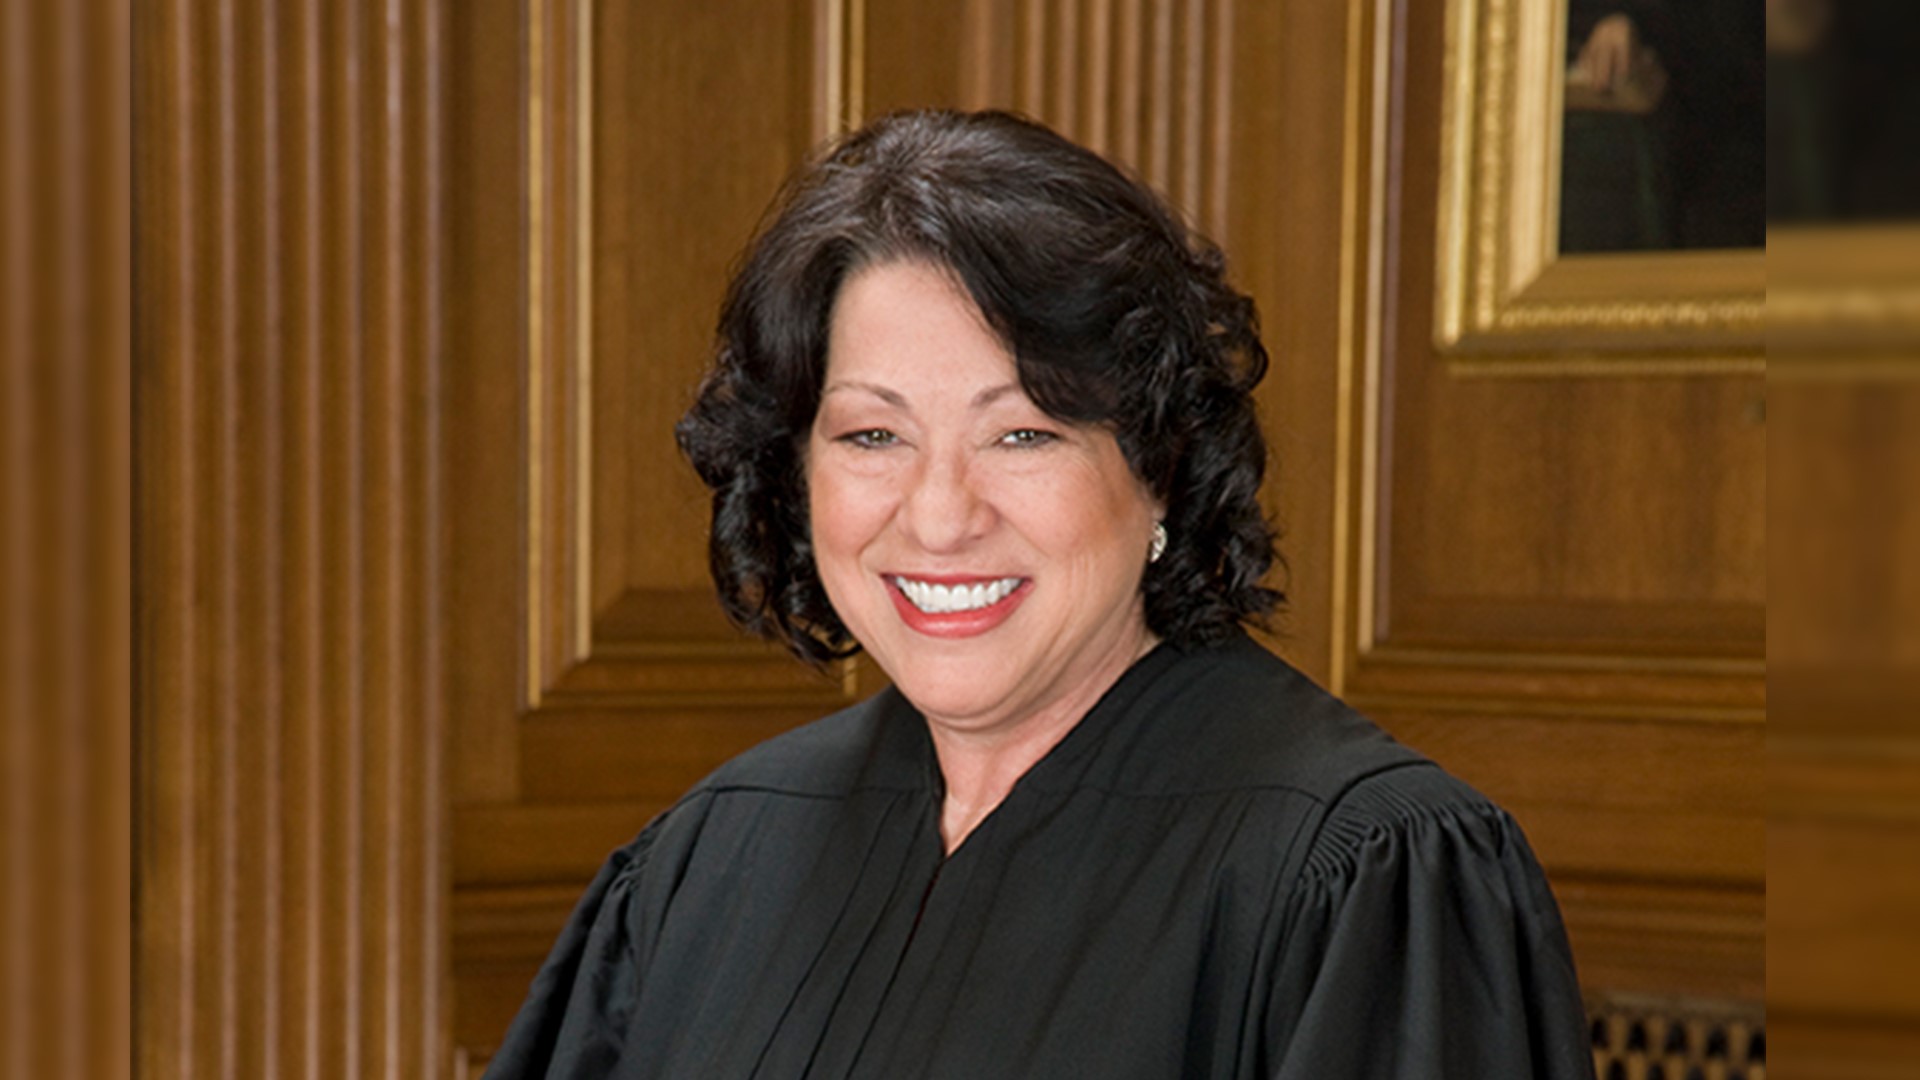 Justice Sotomayor will share about her life, her work as a jurist, and as an author of best-selling children’s books via zoom on Wednesday, March 22.